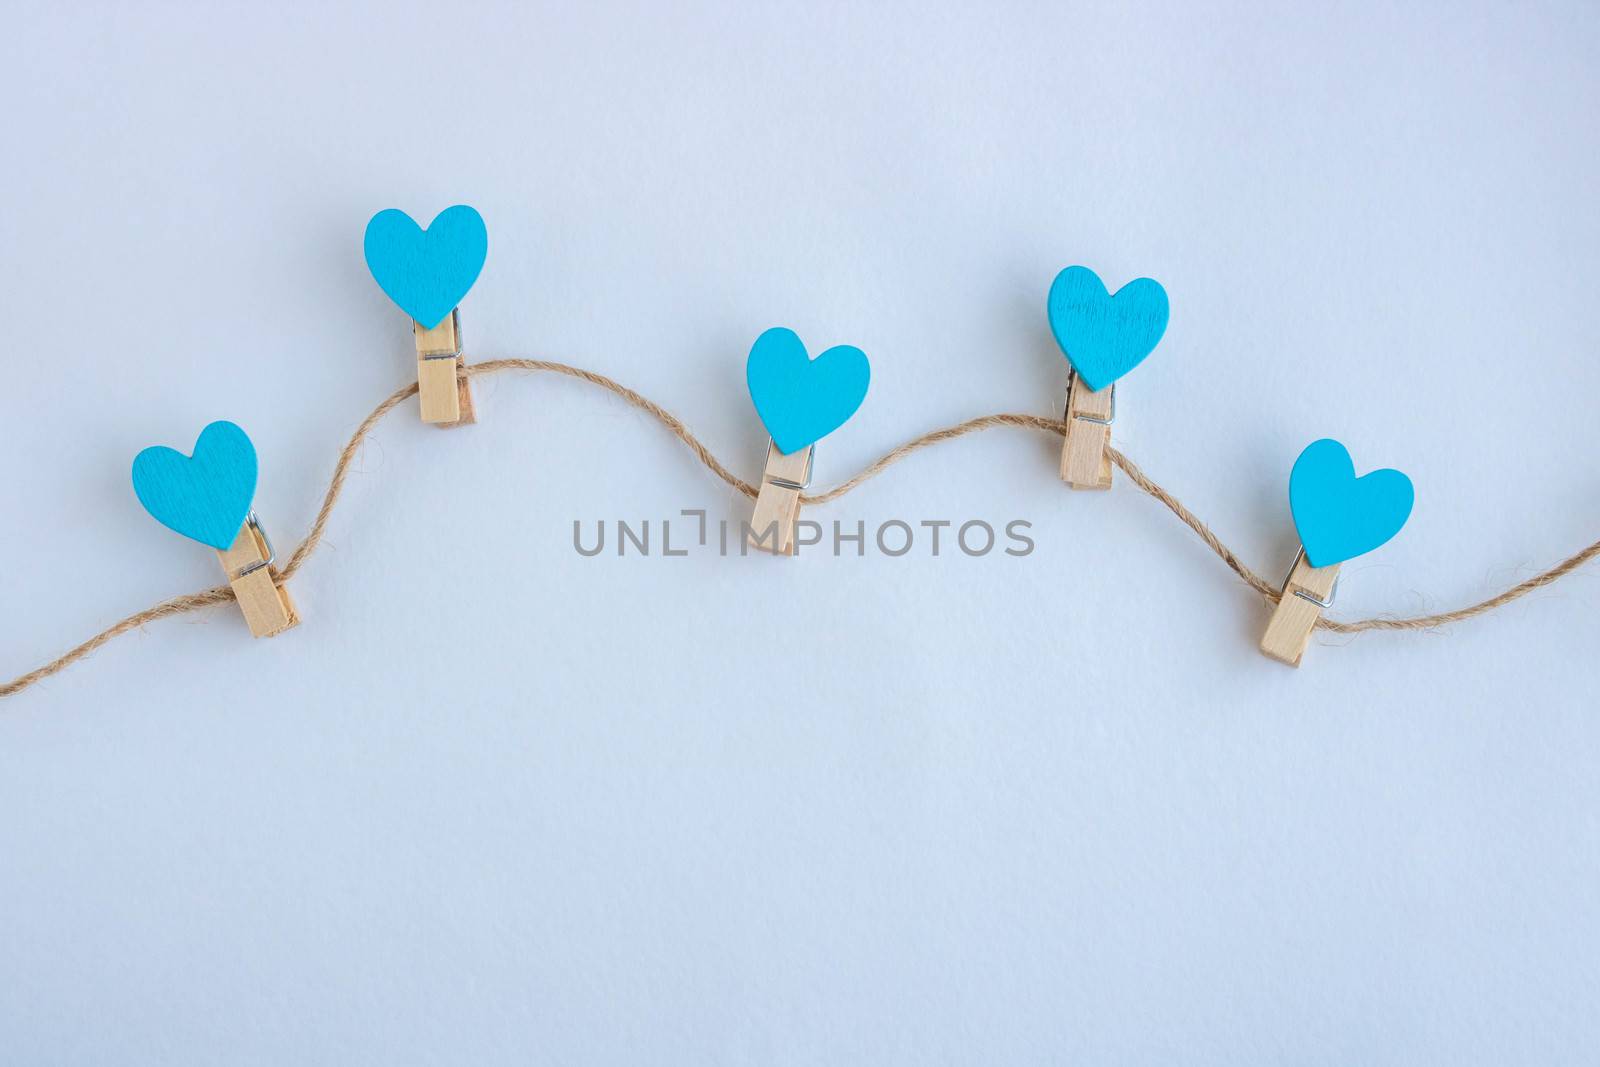 Small clothespins and blue hearts on a string on a white background.